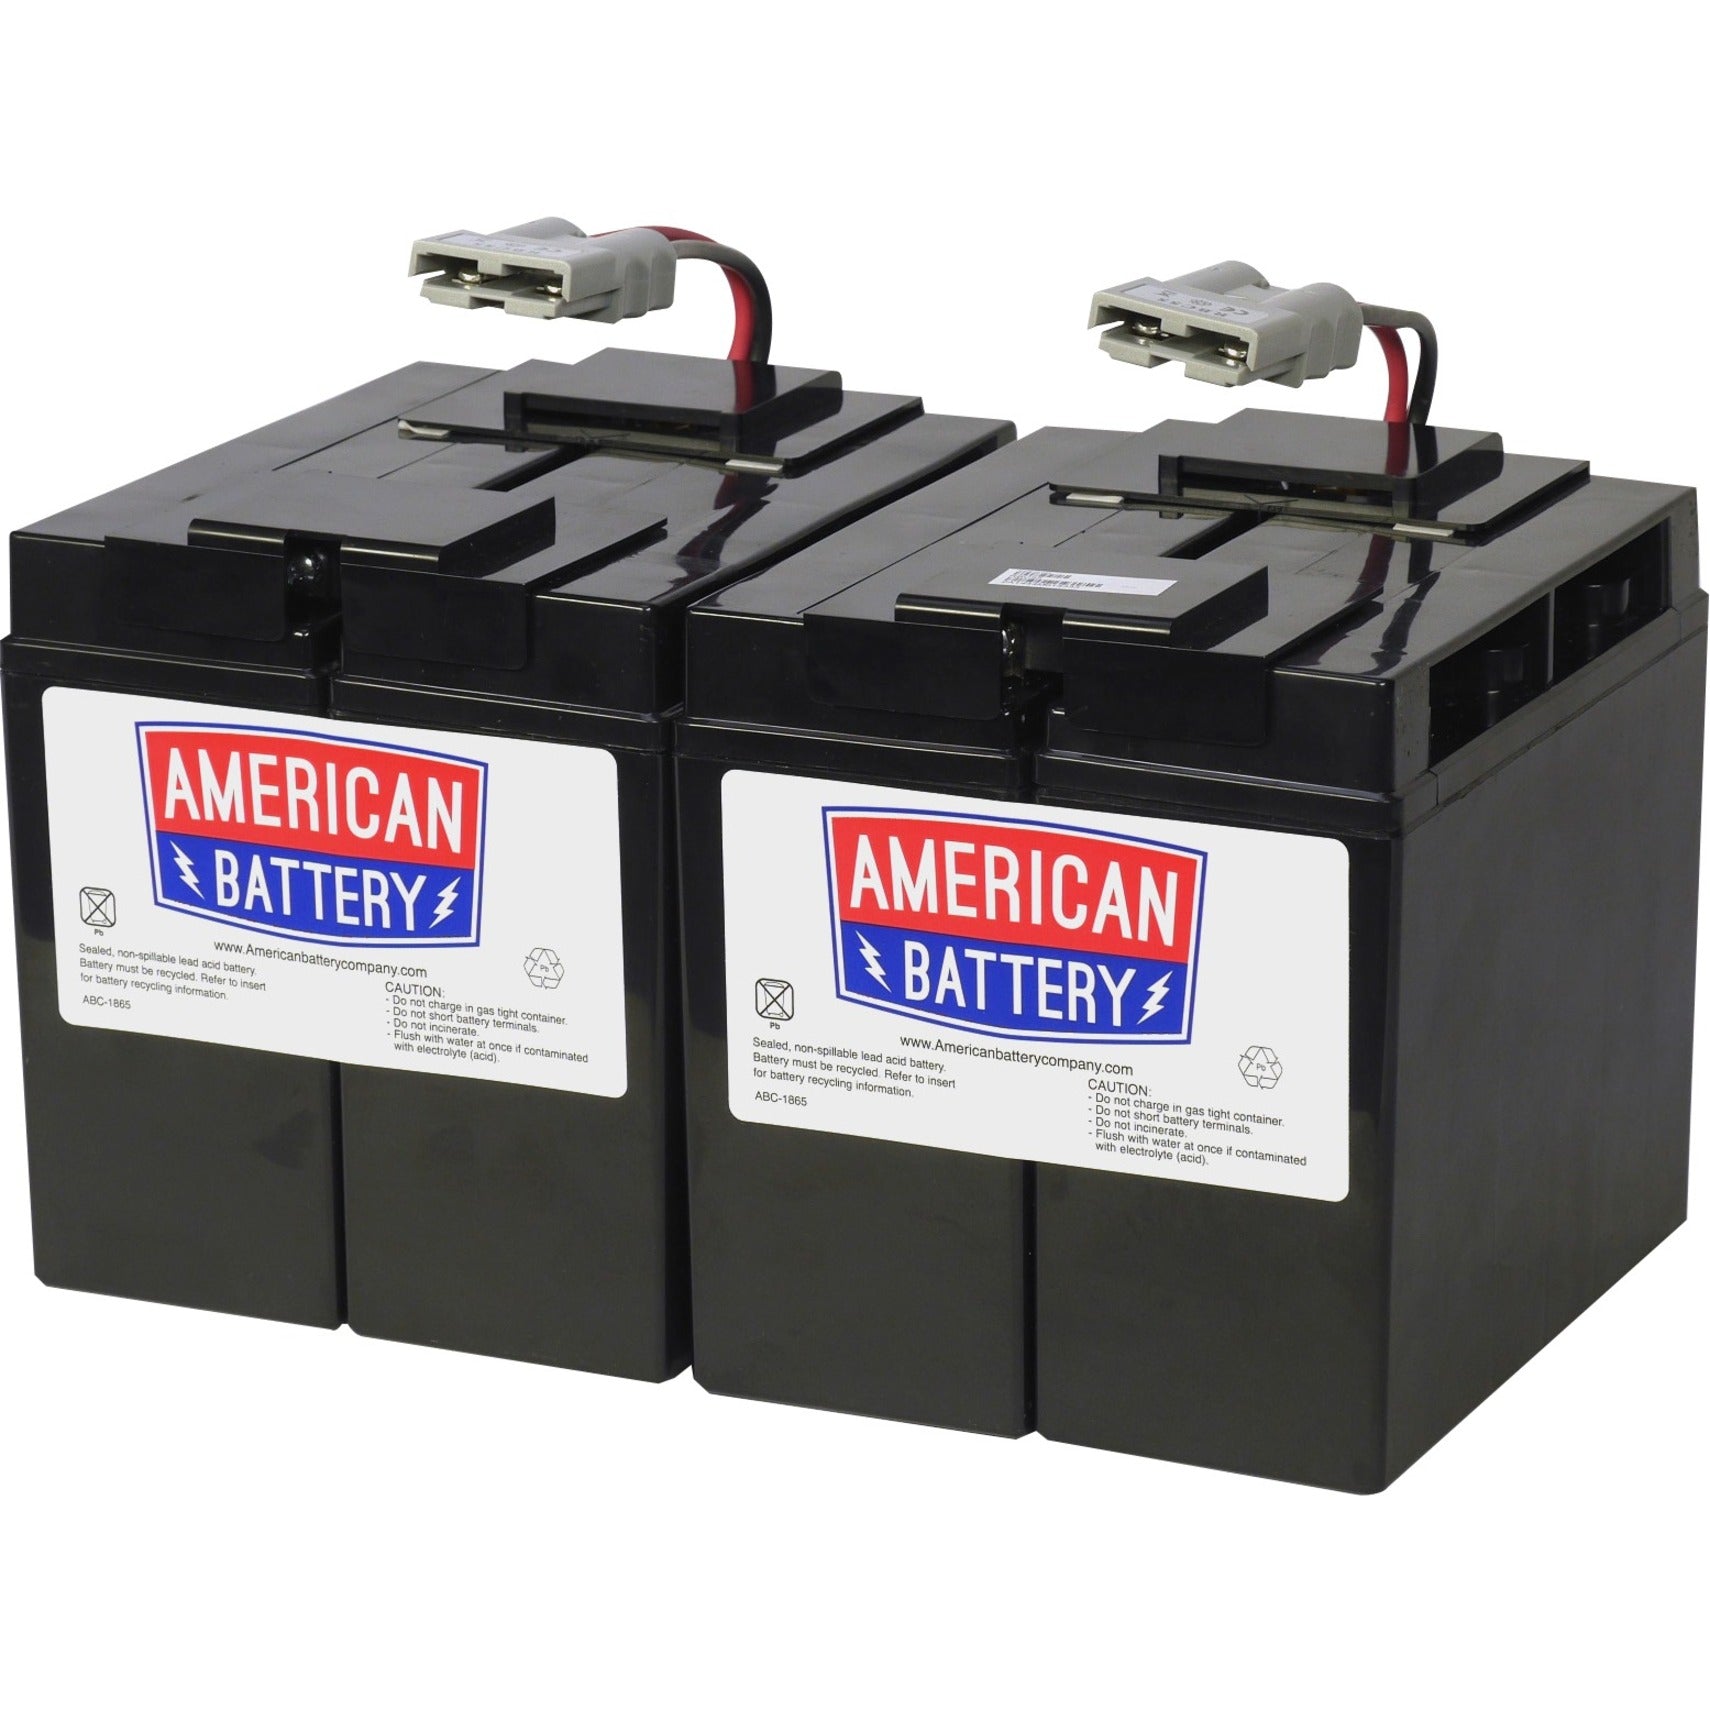 ABC RBC11 Replacement Battery Cartridge, 2 Year Warranty, Hot Swappable, 12V DC, 18000mAh